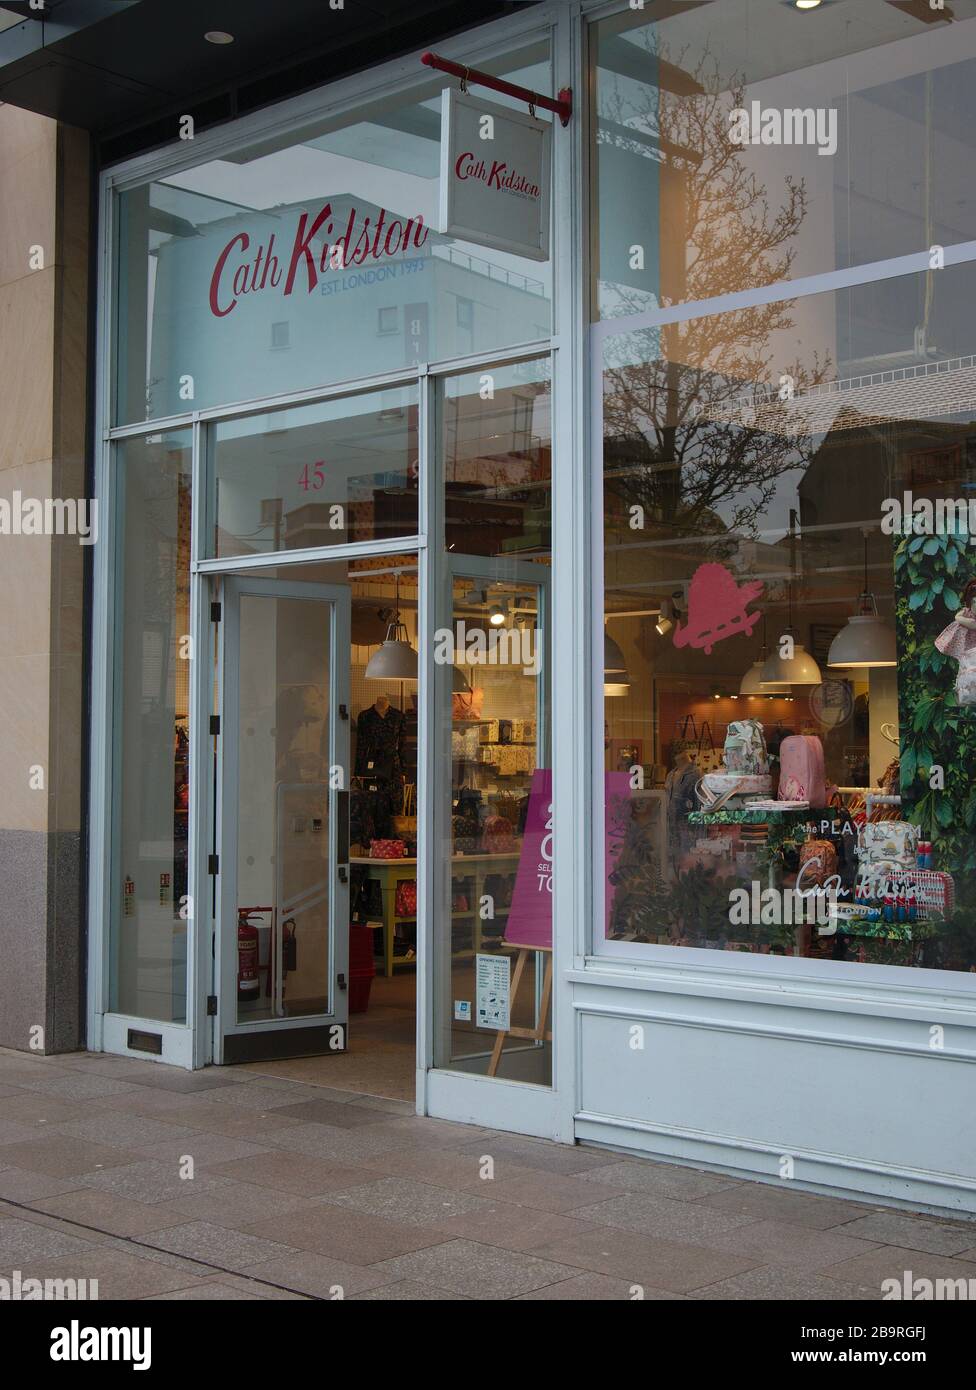 Cath Kidston in Cardff city centre trading before the Coronavirus pandemic forced forced the retailer to close stores and seek administrators. Stock Photo